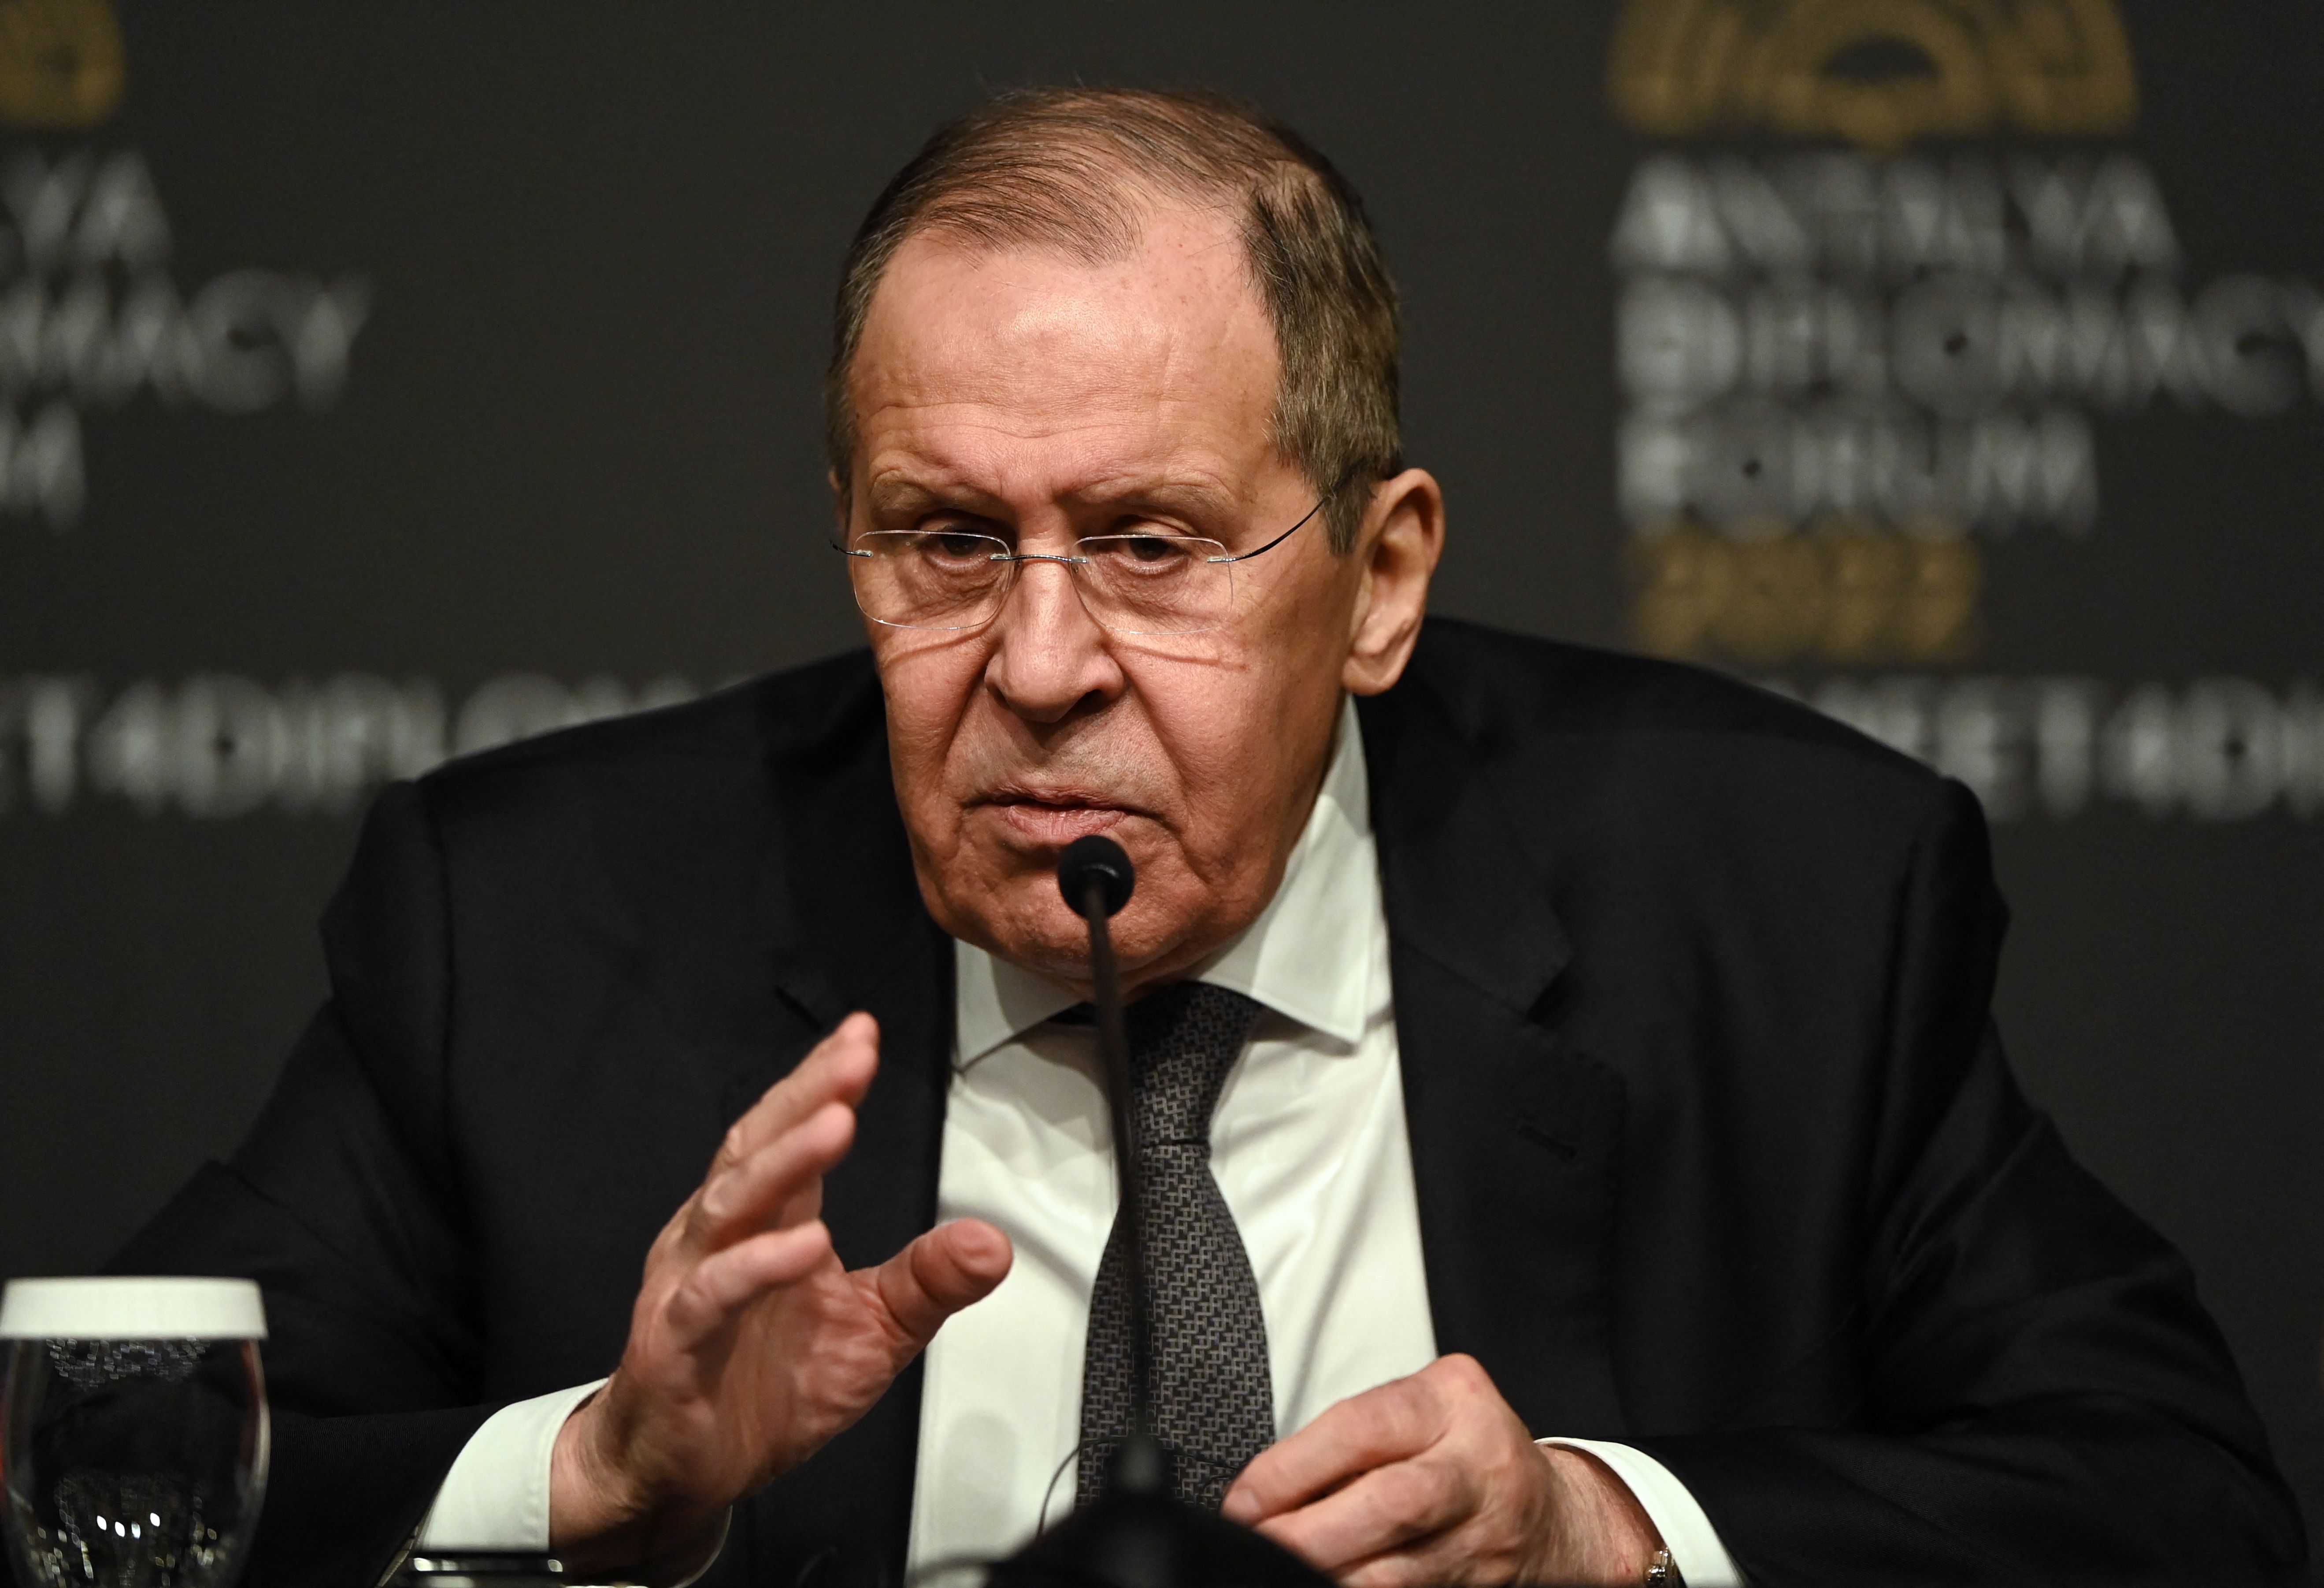 Russian Foreign Minister Sergei Lavrov gives a press conference after meeting Ukraine's Foreign Minister for talks in Antalya, Turkey, on March 10.